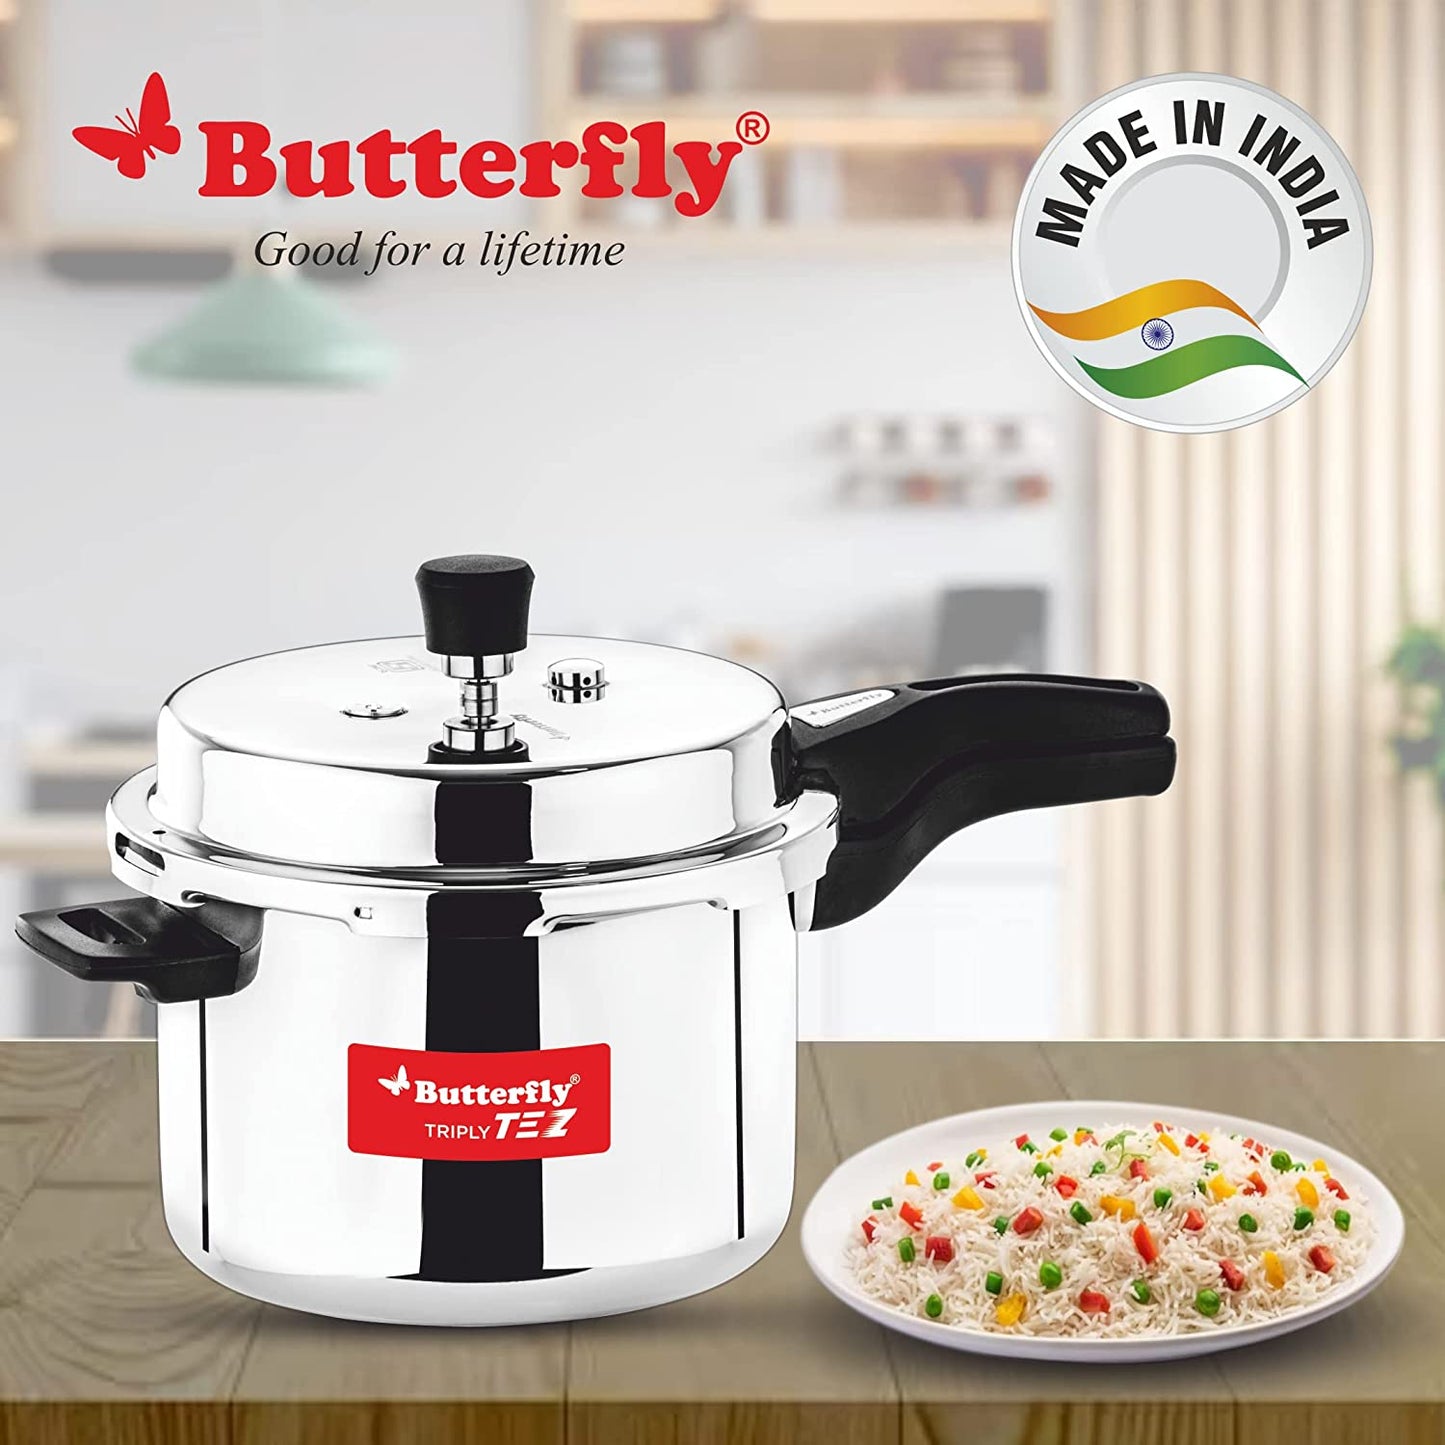 Butterfly Tez Triply Stainless Steel Induction Base Outer Lid Pressure Cooker, 3 Litres